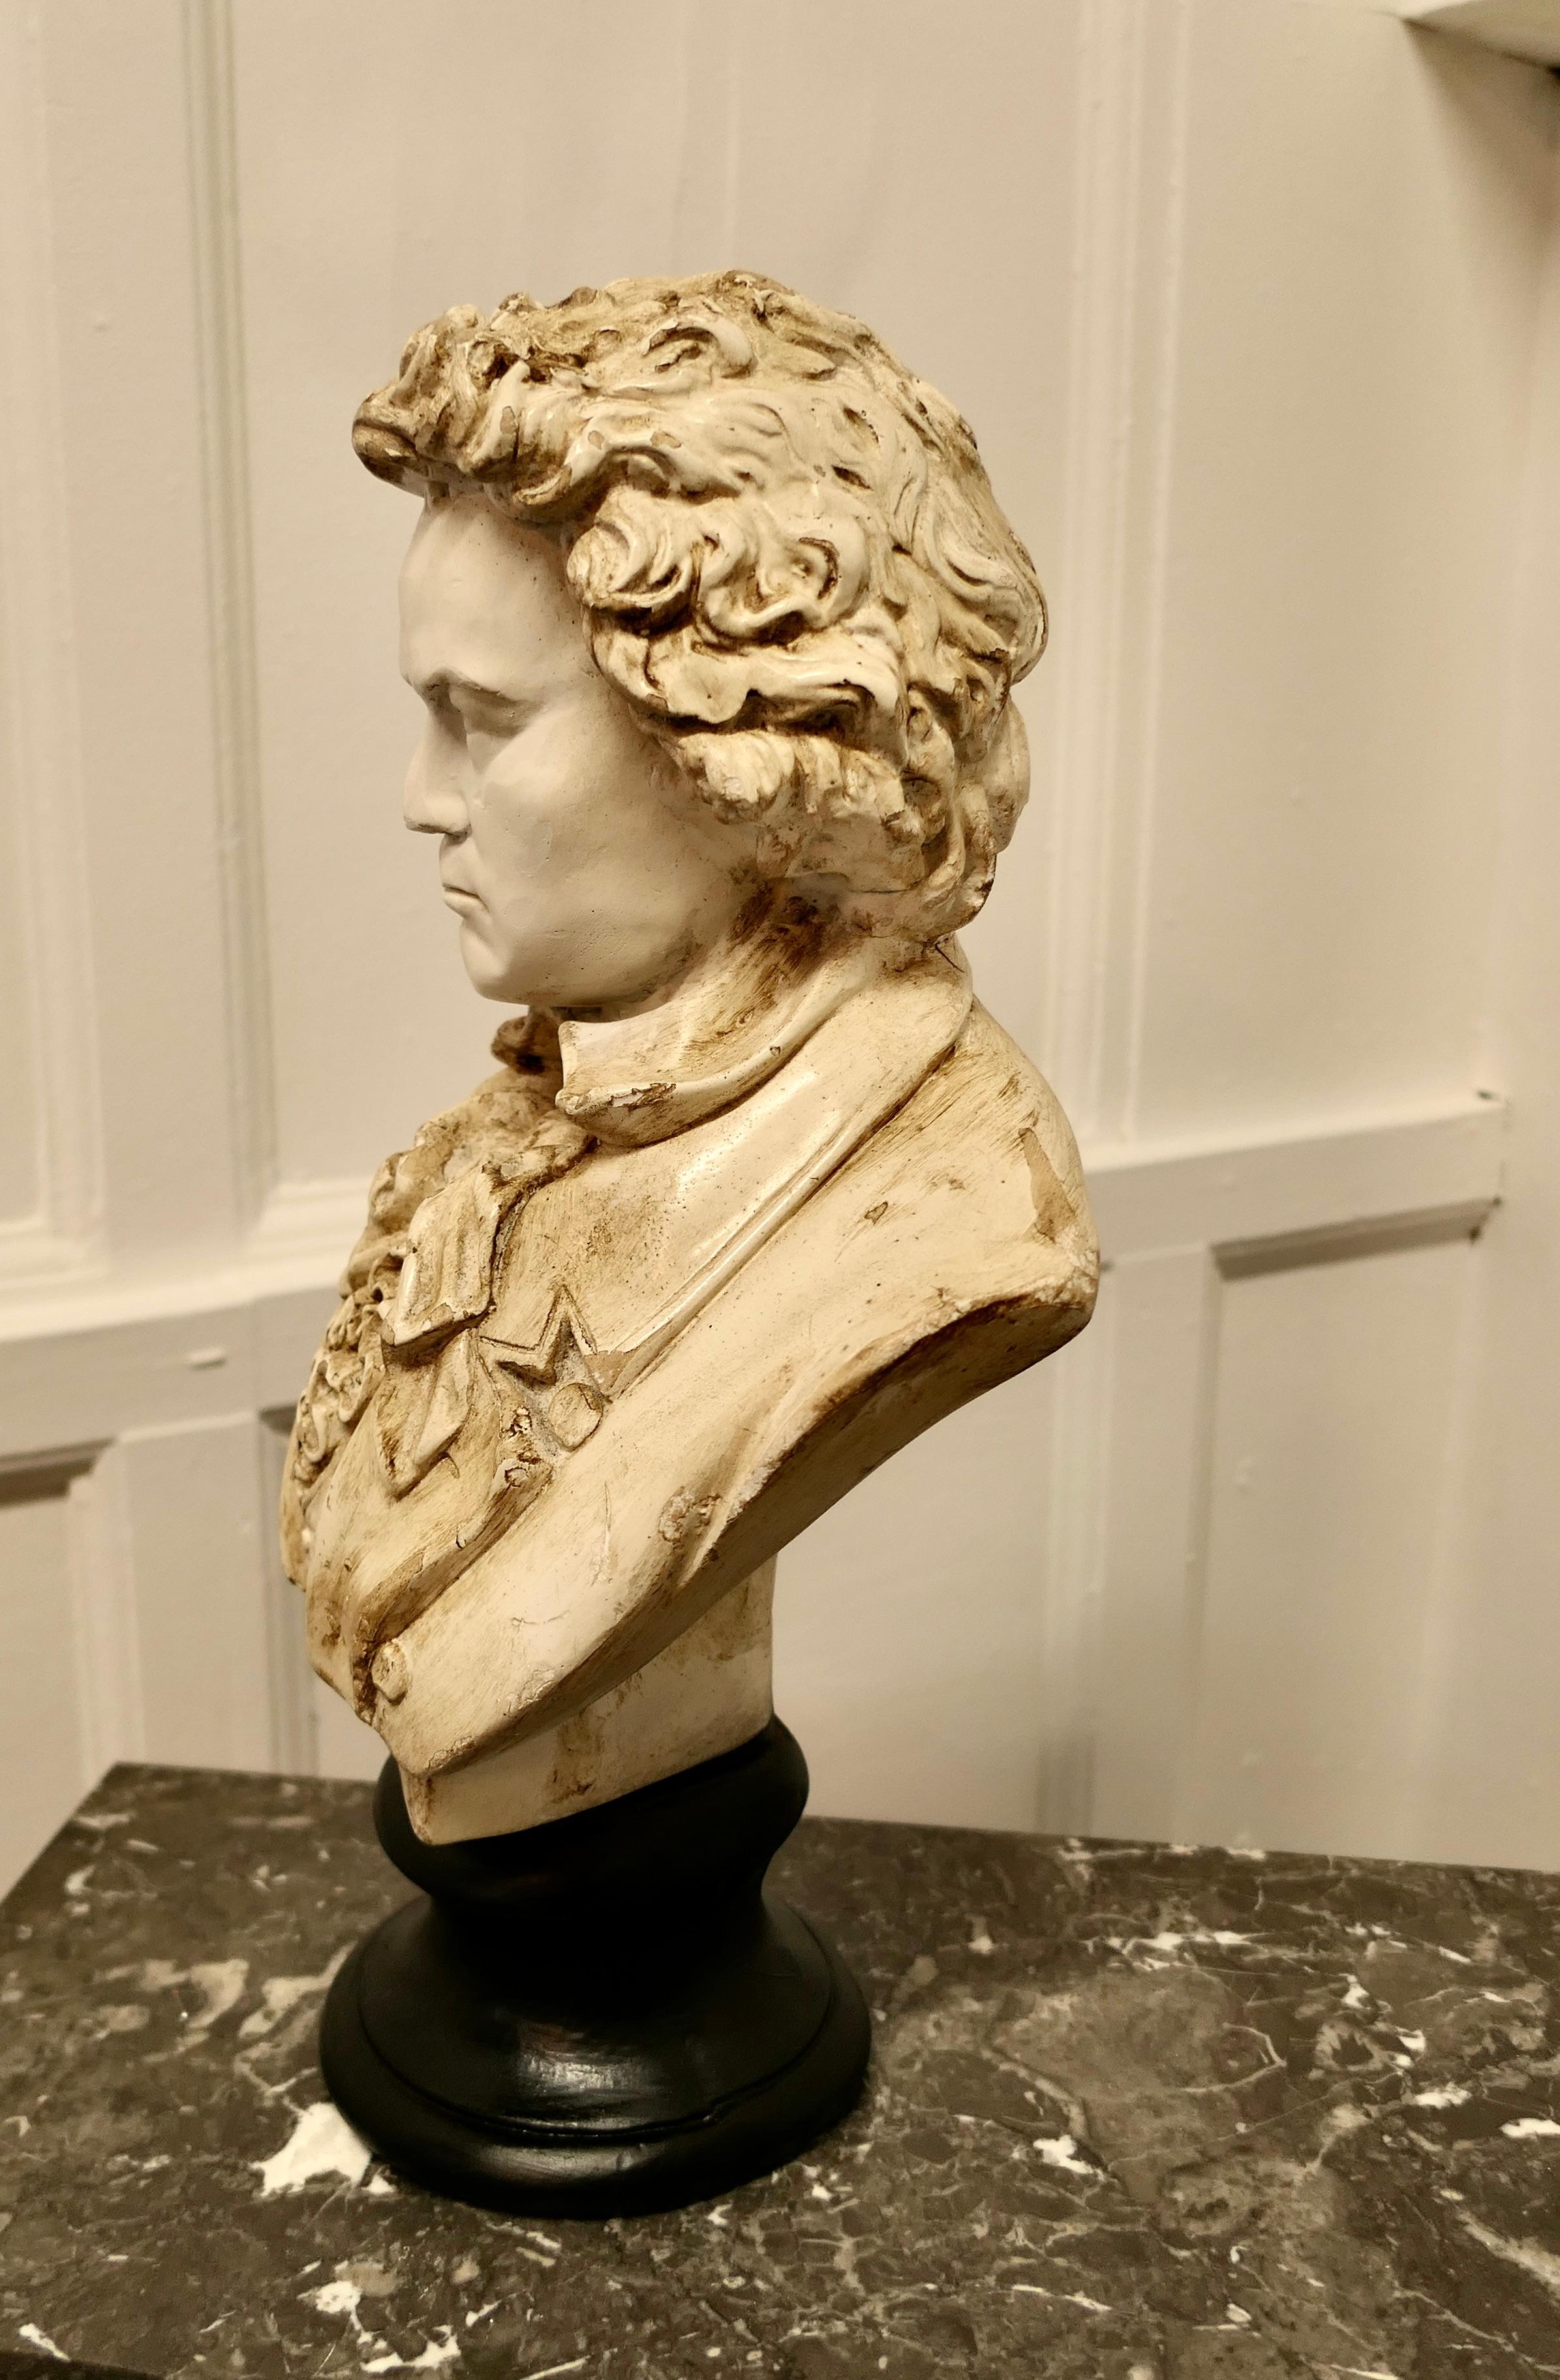 A good aged bust of Ludwig van Beethoven


A Good Bust of Beethoven, the bust is made on Gesso over plaster it set on a turned black socle base, it is an elegant likeness of the Composer
 

The Statue is 17” high and 11” across at his